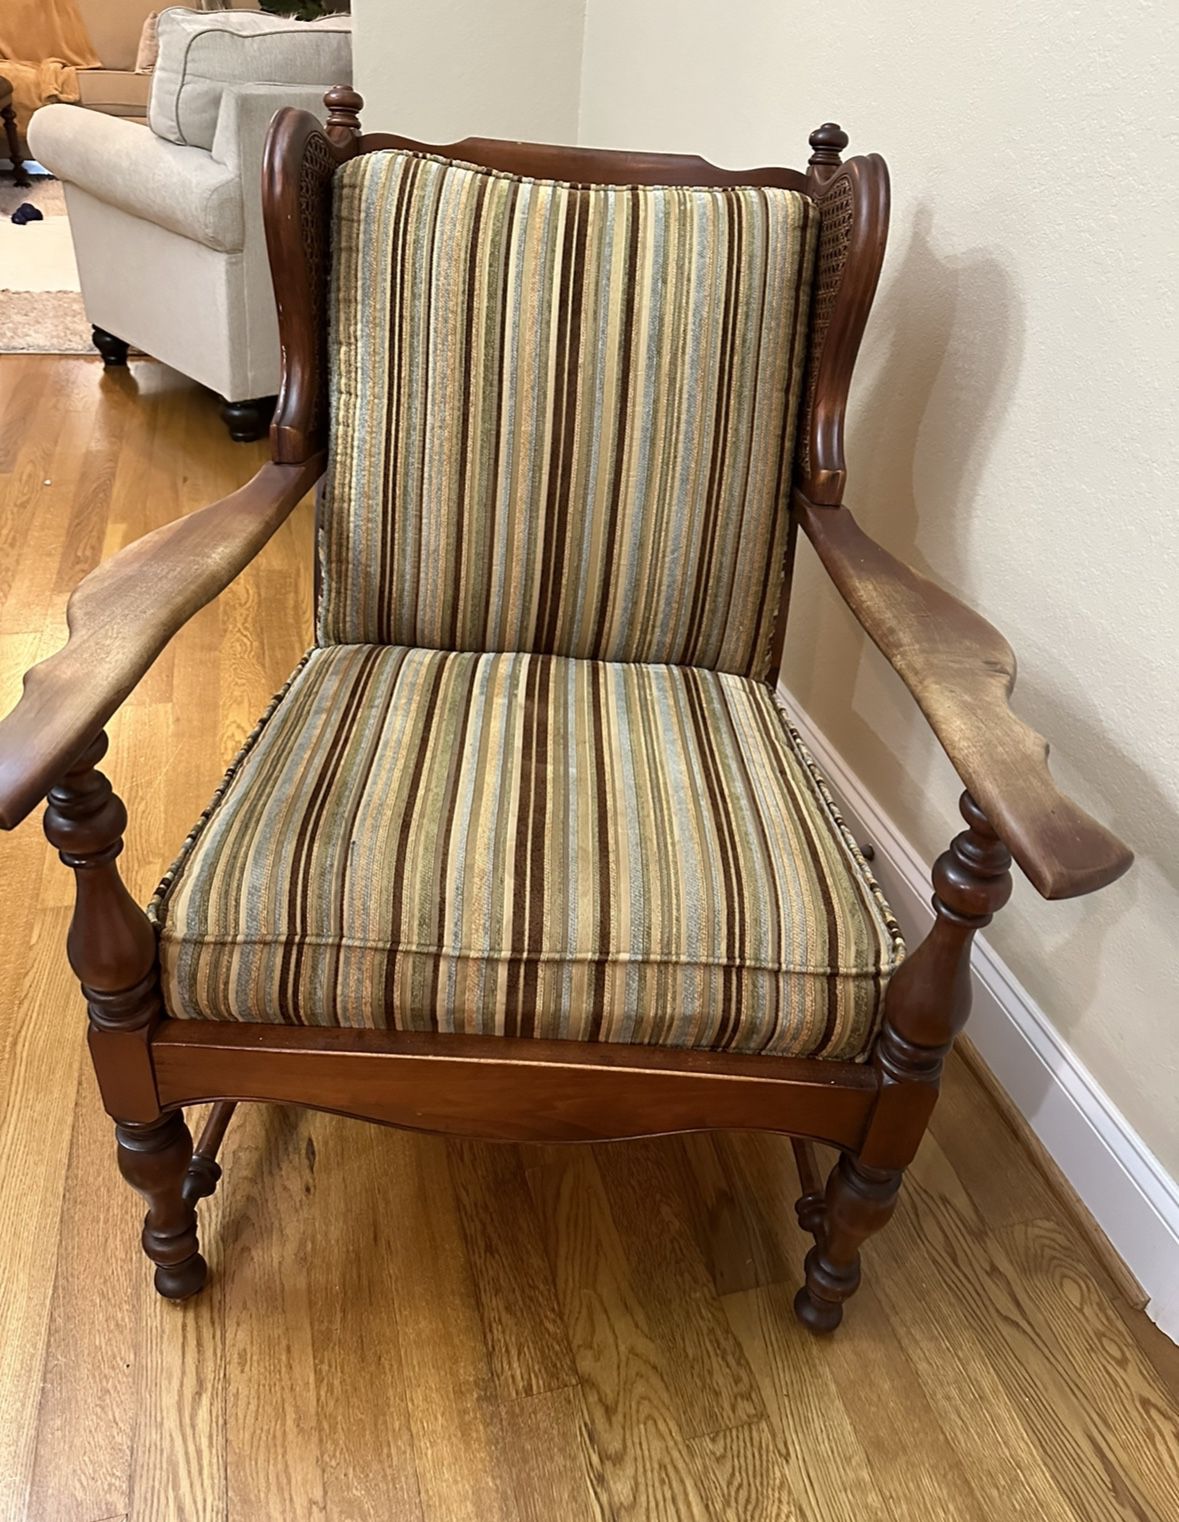 Beautiful Antique chair